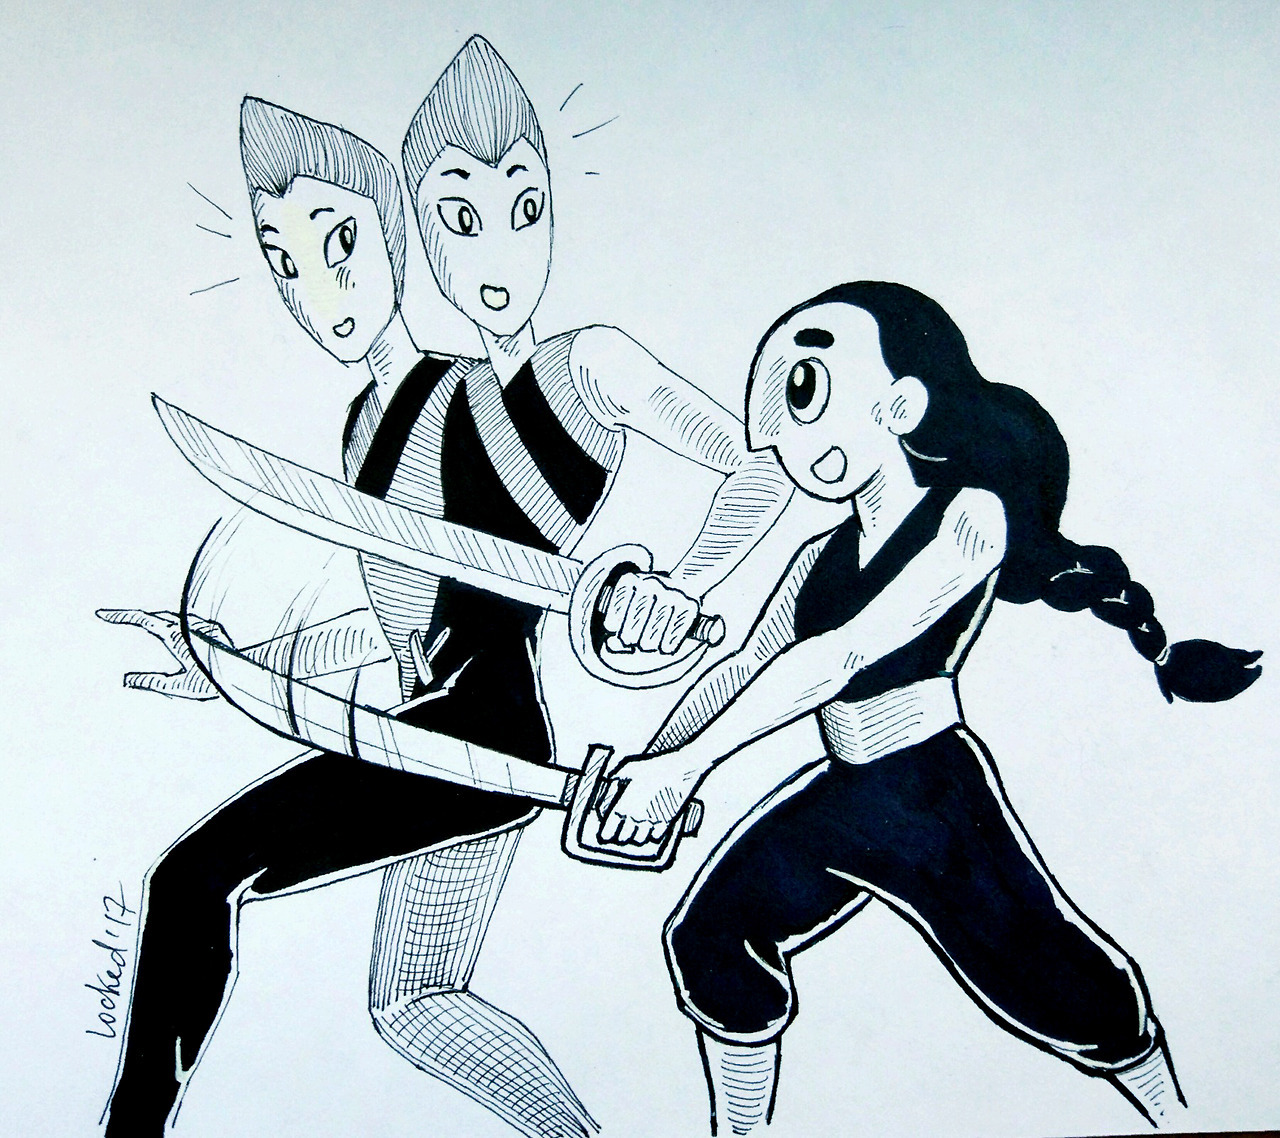 Inktober 17: 6 - Sword. Connie teaching Rutile Twins how to swordifght :3 I do find the twins to be the most ‘knightly’ out of Off Colors.